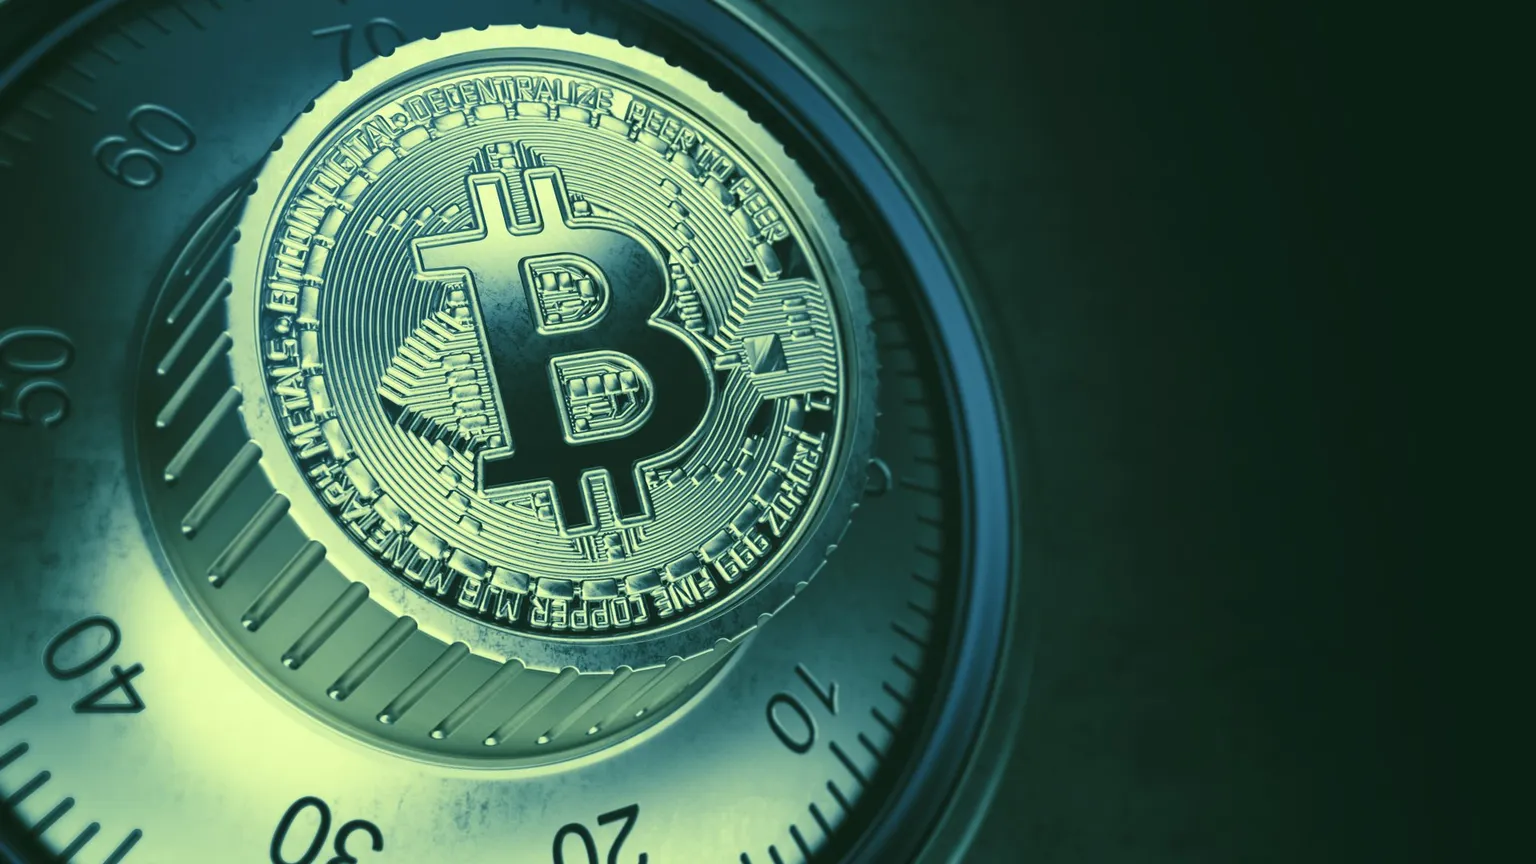 $64 million worth of once dormant Bitcoin may still move. Image: Shutterstock